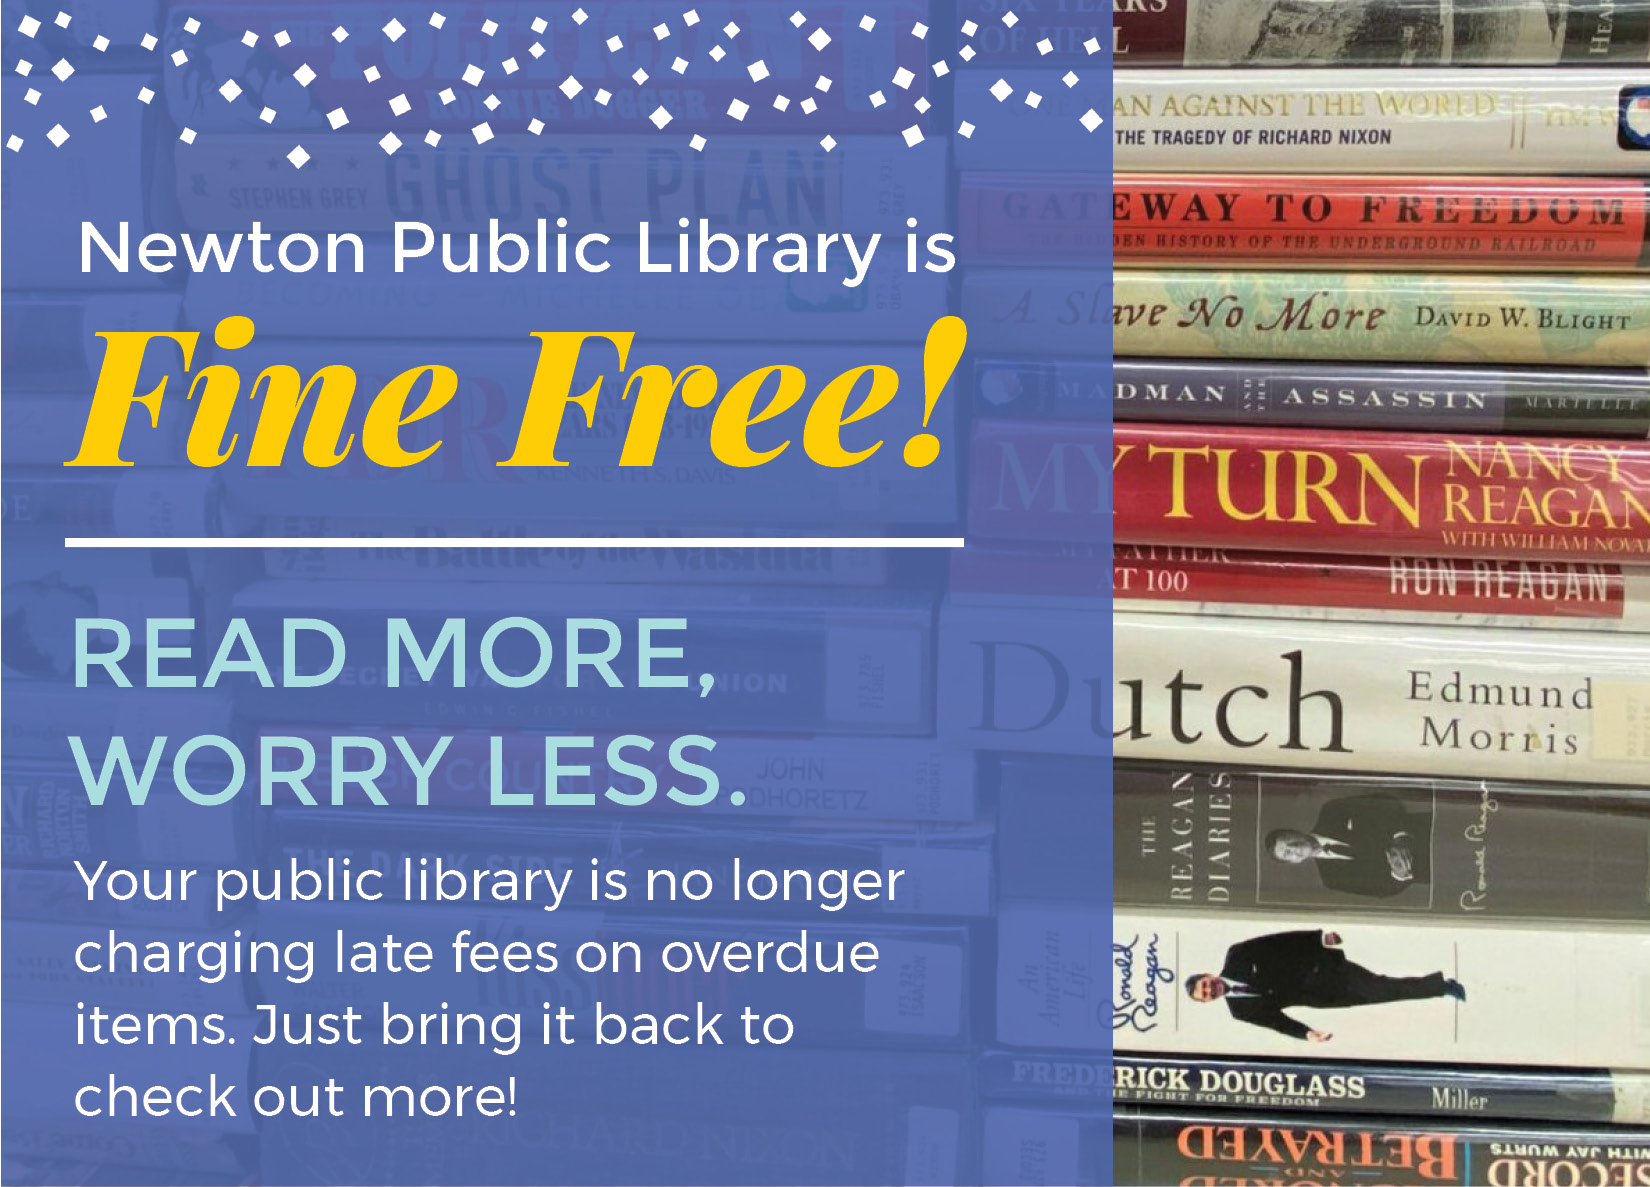 Graphic of books with superimposed text reading "Read More, Worry Less. Newton Public Library is no longer charging late fees on overdue items. Just bring it back to check out more!